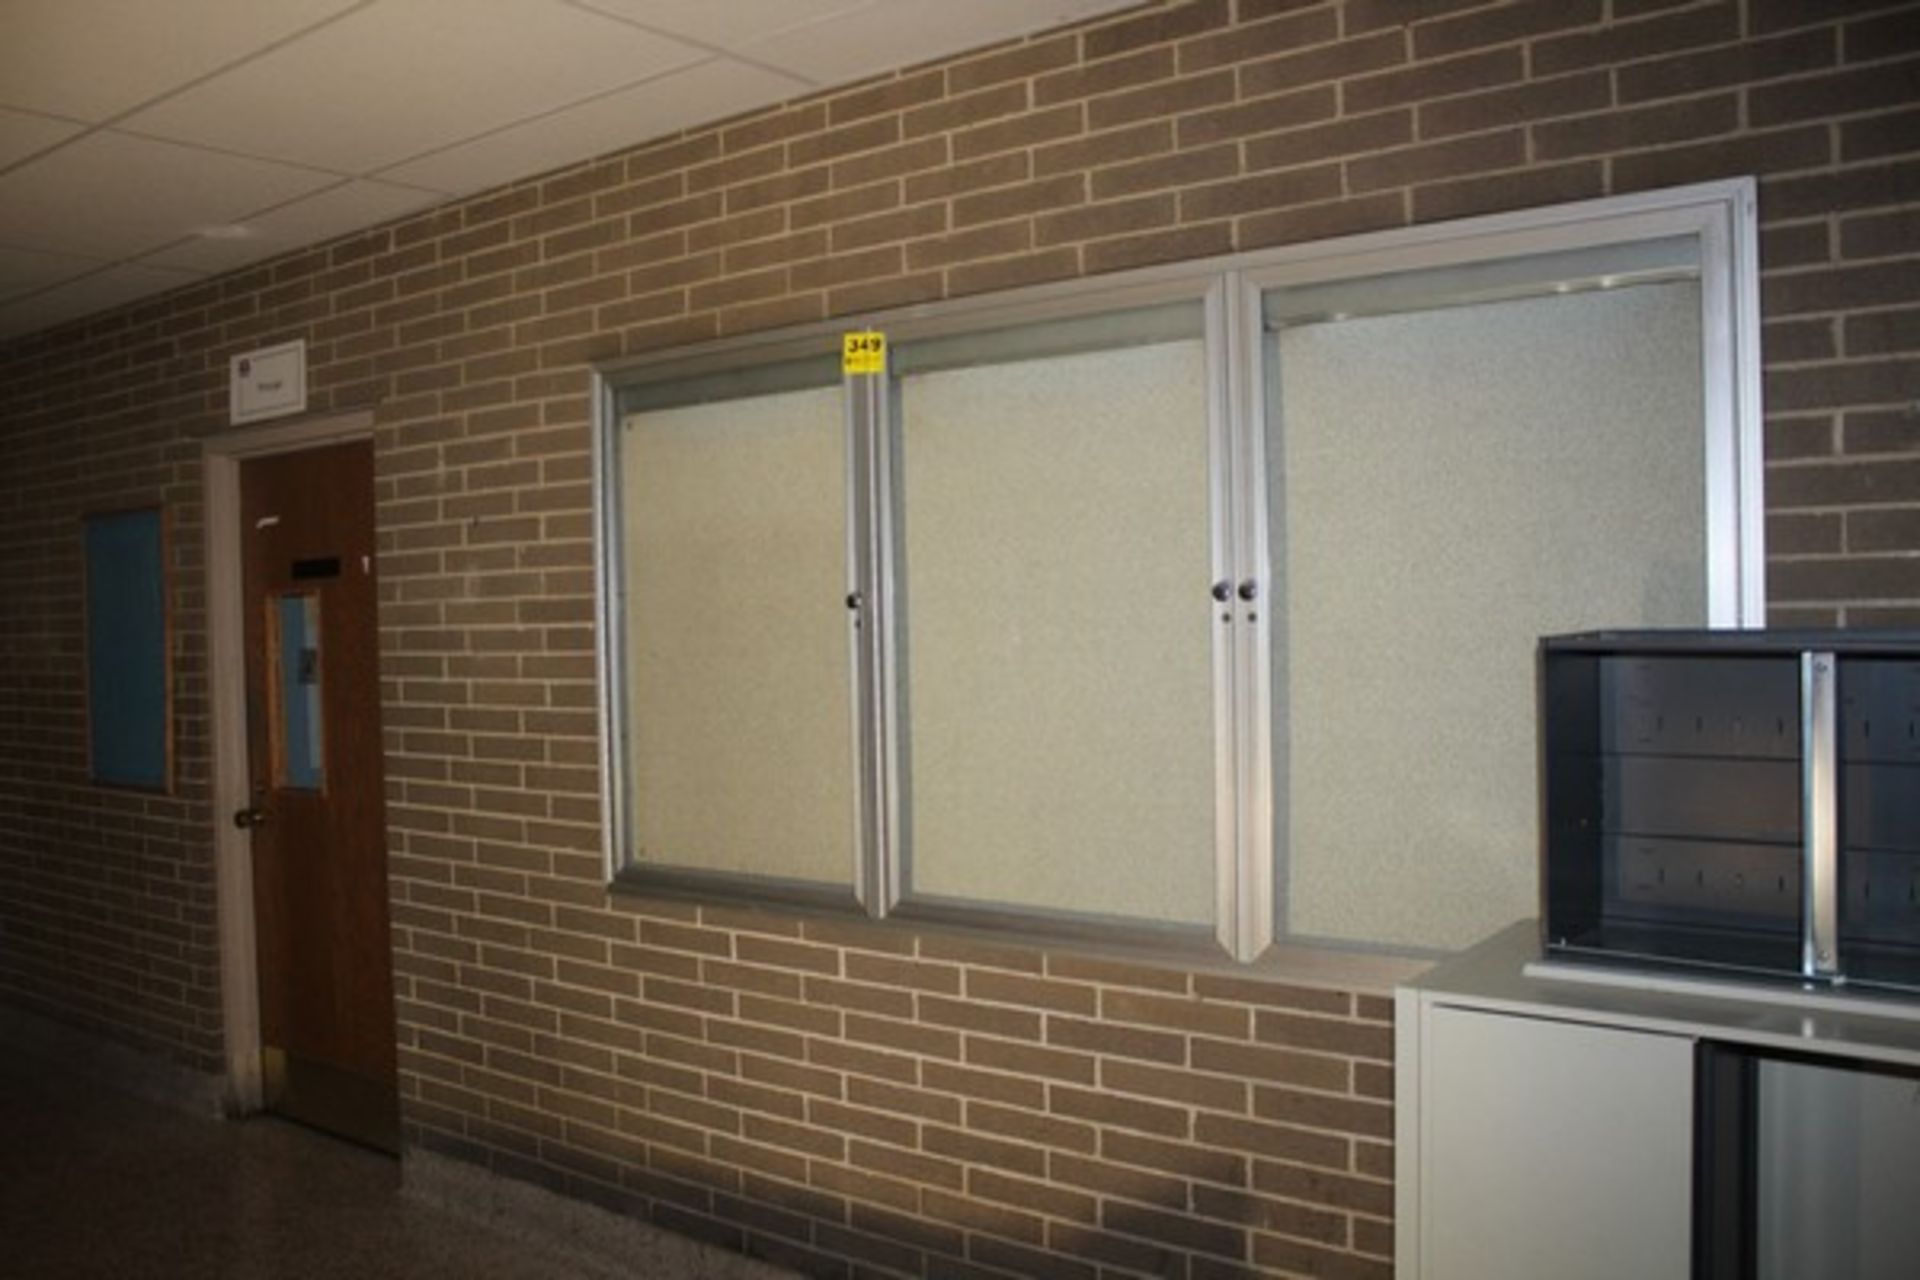 ALUMINUM FRAME GLASS INFO DISPLAY, 8' X 4' (BUYER HAS RIGHT OF ABANDONMENT)